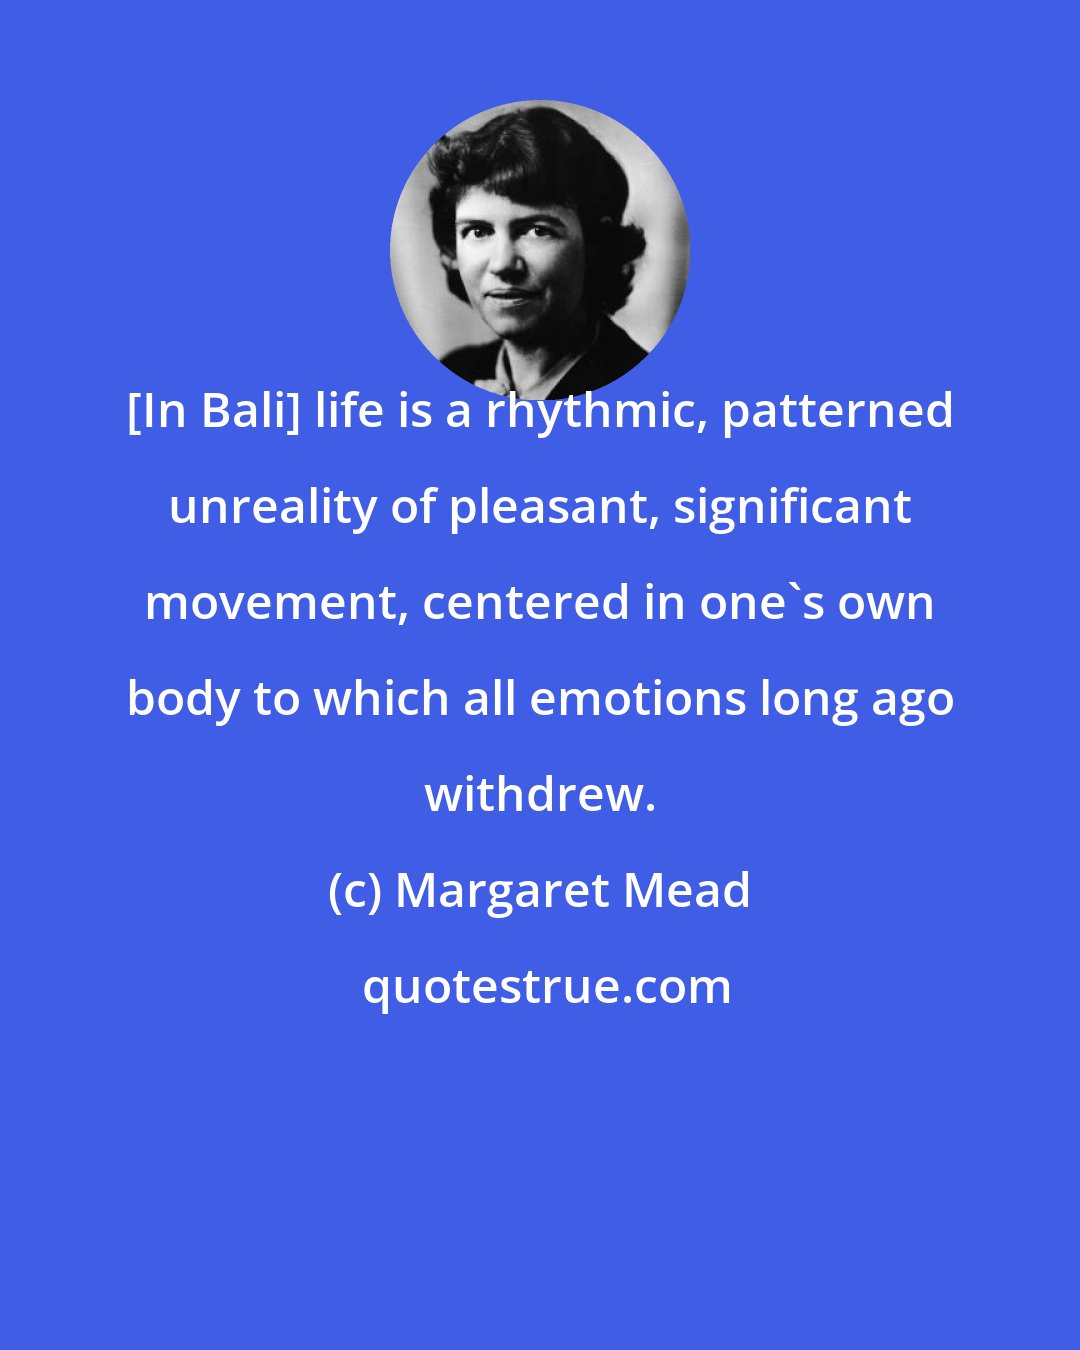 Margaret Mead: [In Bali] life is a rhythmic, patterned unreality of pleasant, significant movement, centered in one's own body to which all emotions long ago withdrew.